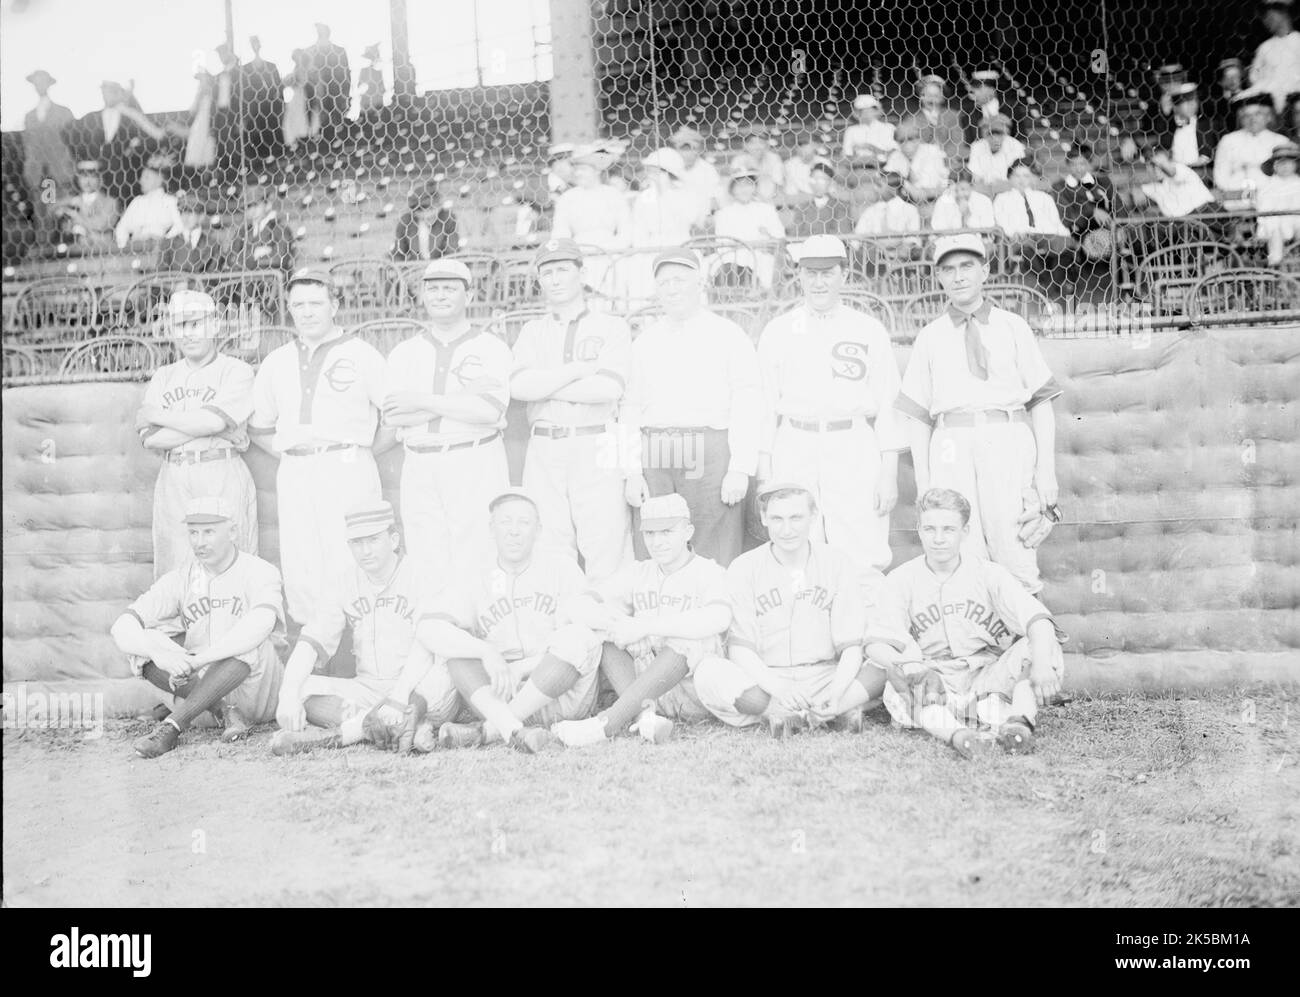 Baseball, Congressional - Democrats. Standing: Unidentified; Kinkead of New Jersey; Oldfield of Arkansas; Webb of North Carolina; Tom Reilly of Connecticut; Jim Mcdermott of Illinois; Scully of New Jersey; Seated: Unidentified; Pat Harrison of Mississippi; 2 Unidentified; Elder of Louisiana; R.B. Stevens, 1913. Stock Photo